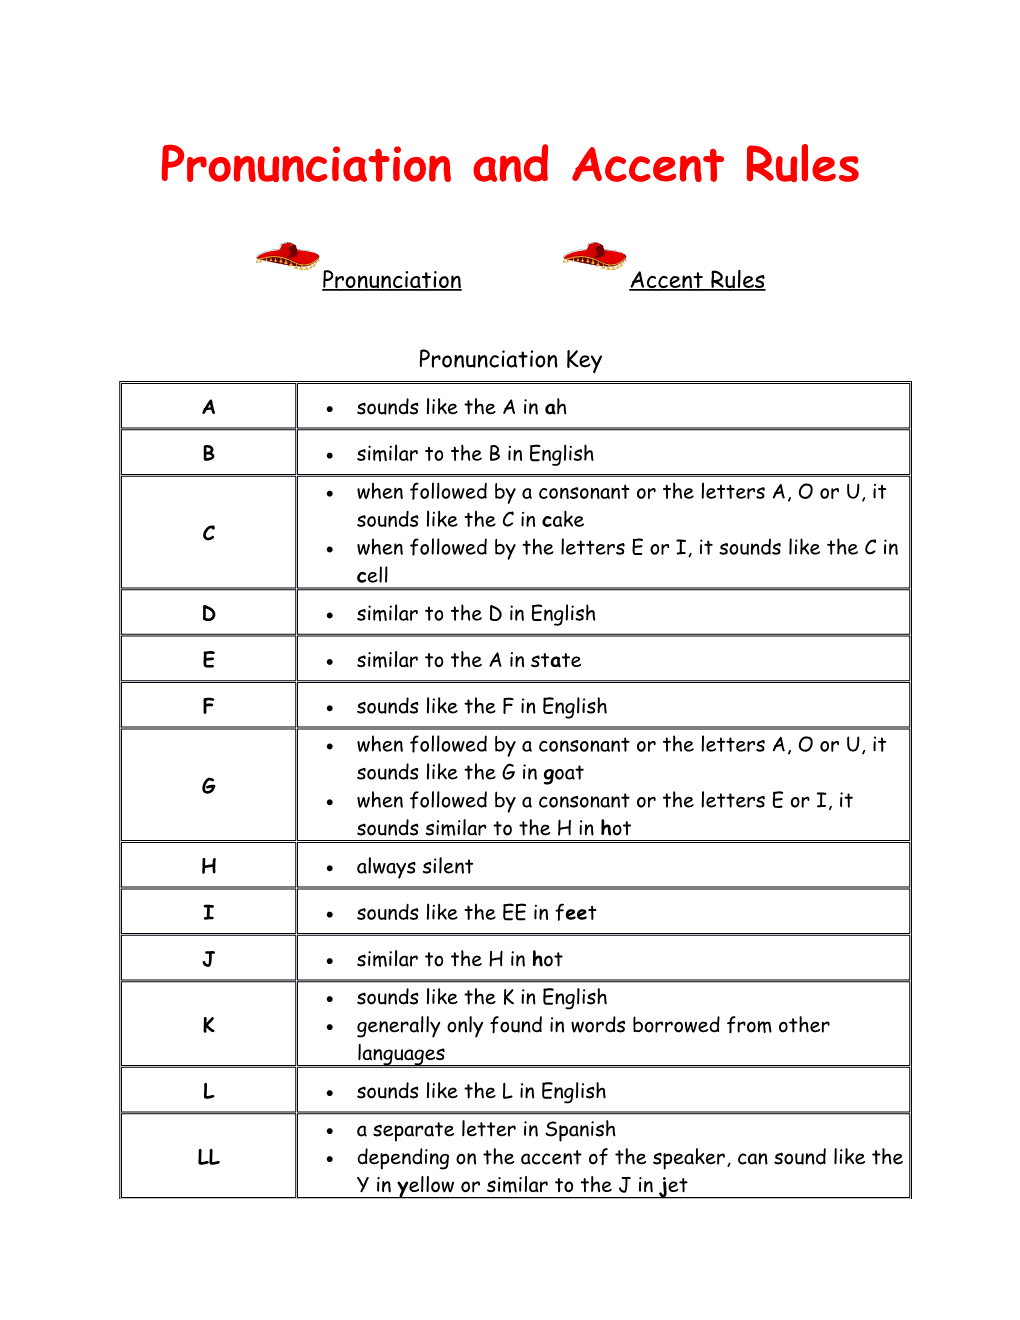 Pronunciation and Accent Rules